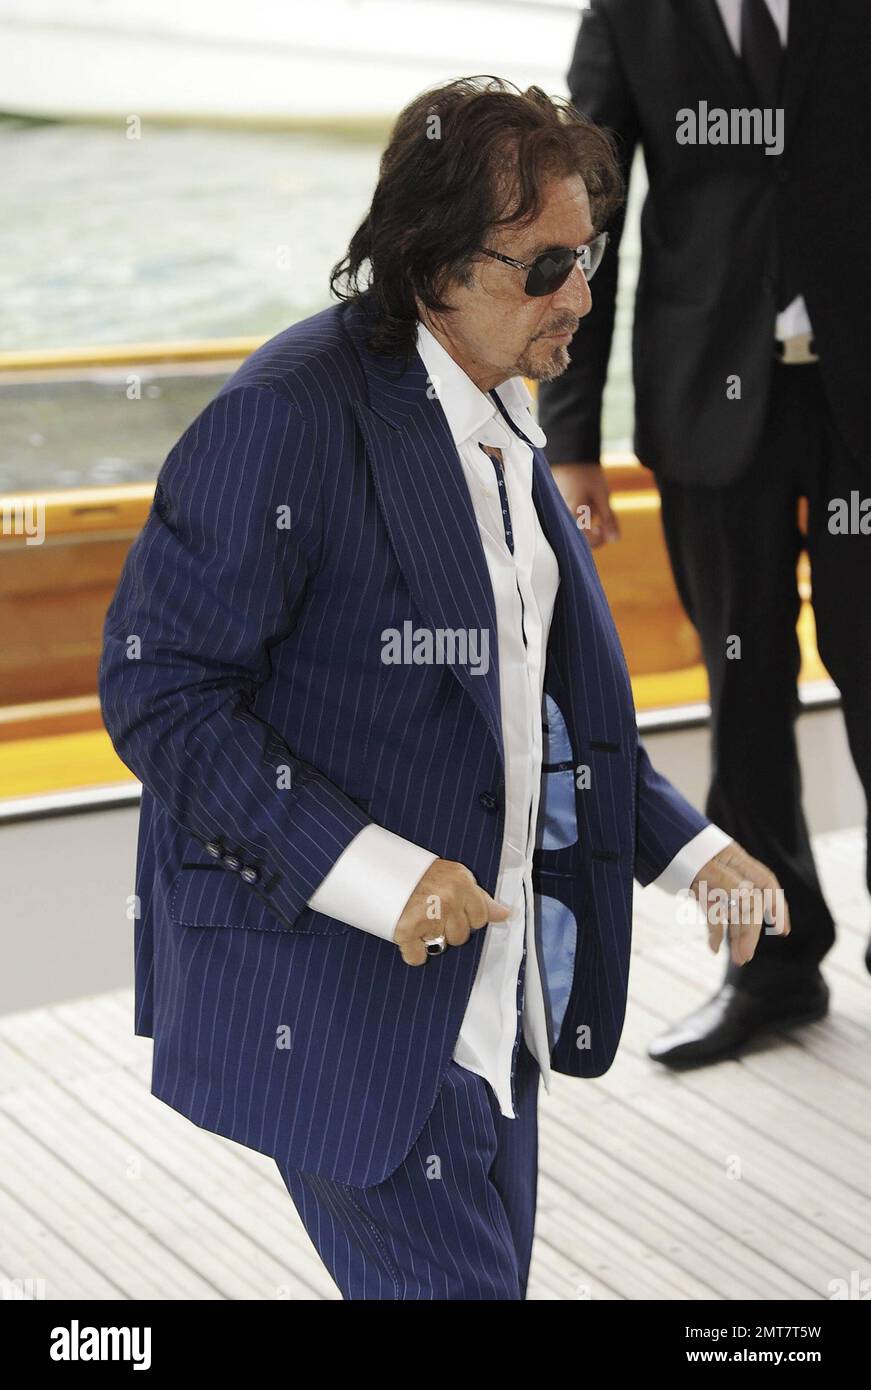 Al Pacino arrives at The 68th Annual Venice Film Festival for the Jaeger Le Coultre Glory to the Filmmaker Award Ceremony and his documentary 'Wild Salome' Photocall. Venice, Italy. 4th September 2011. Stock Photo